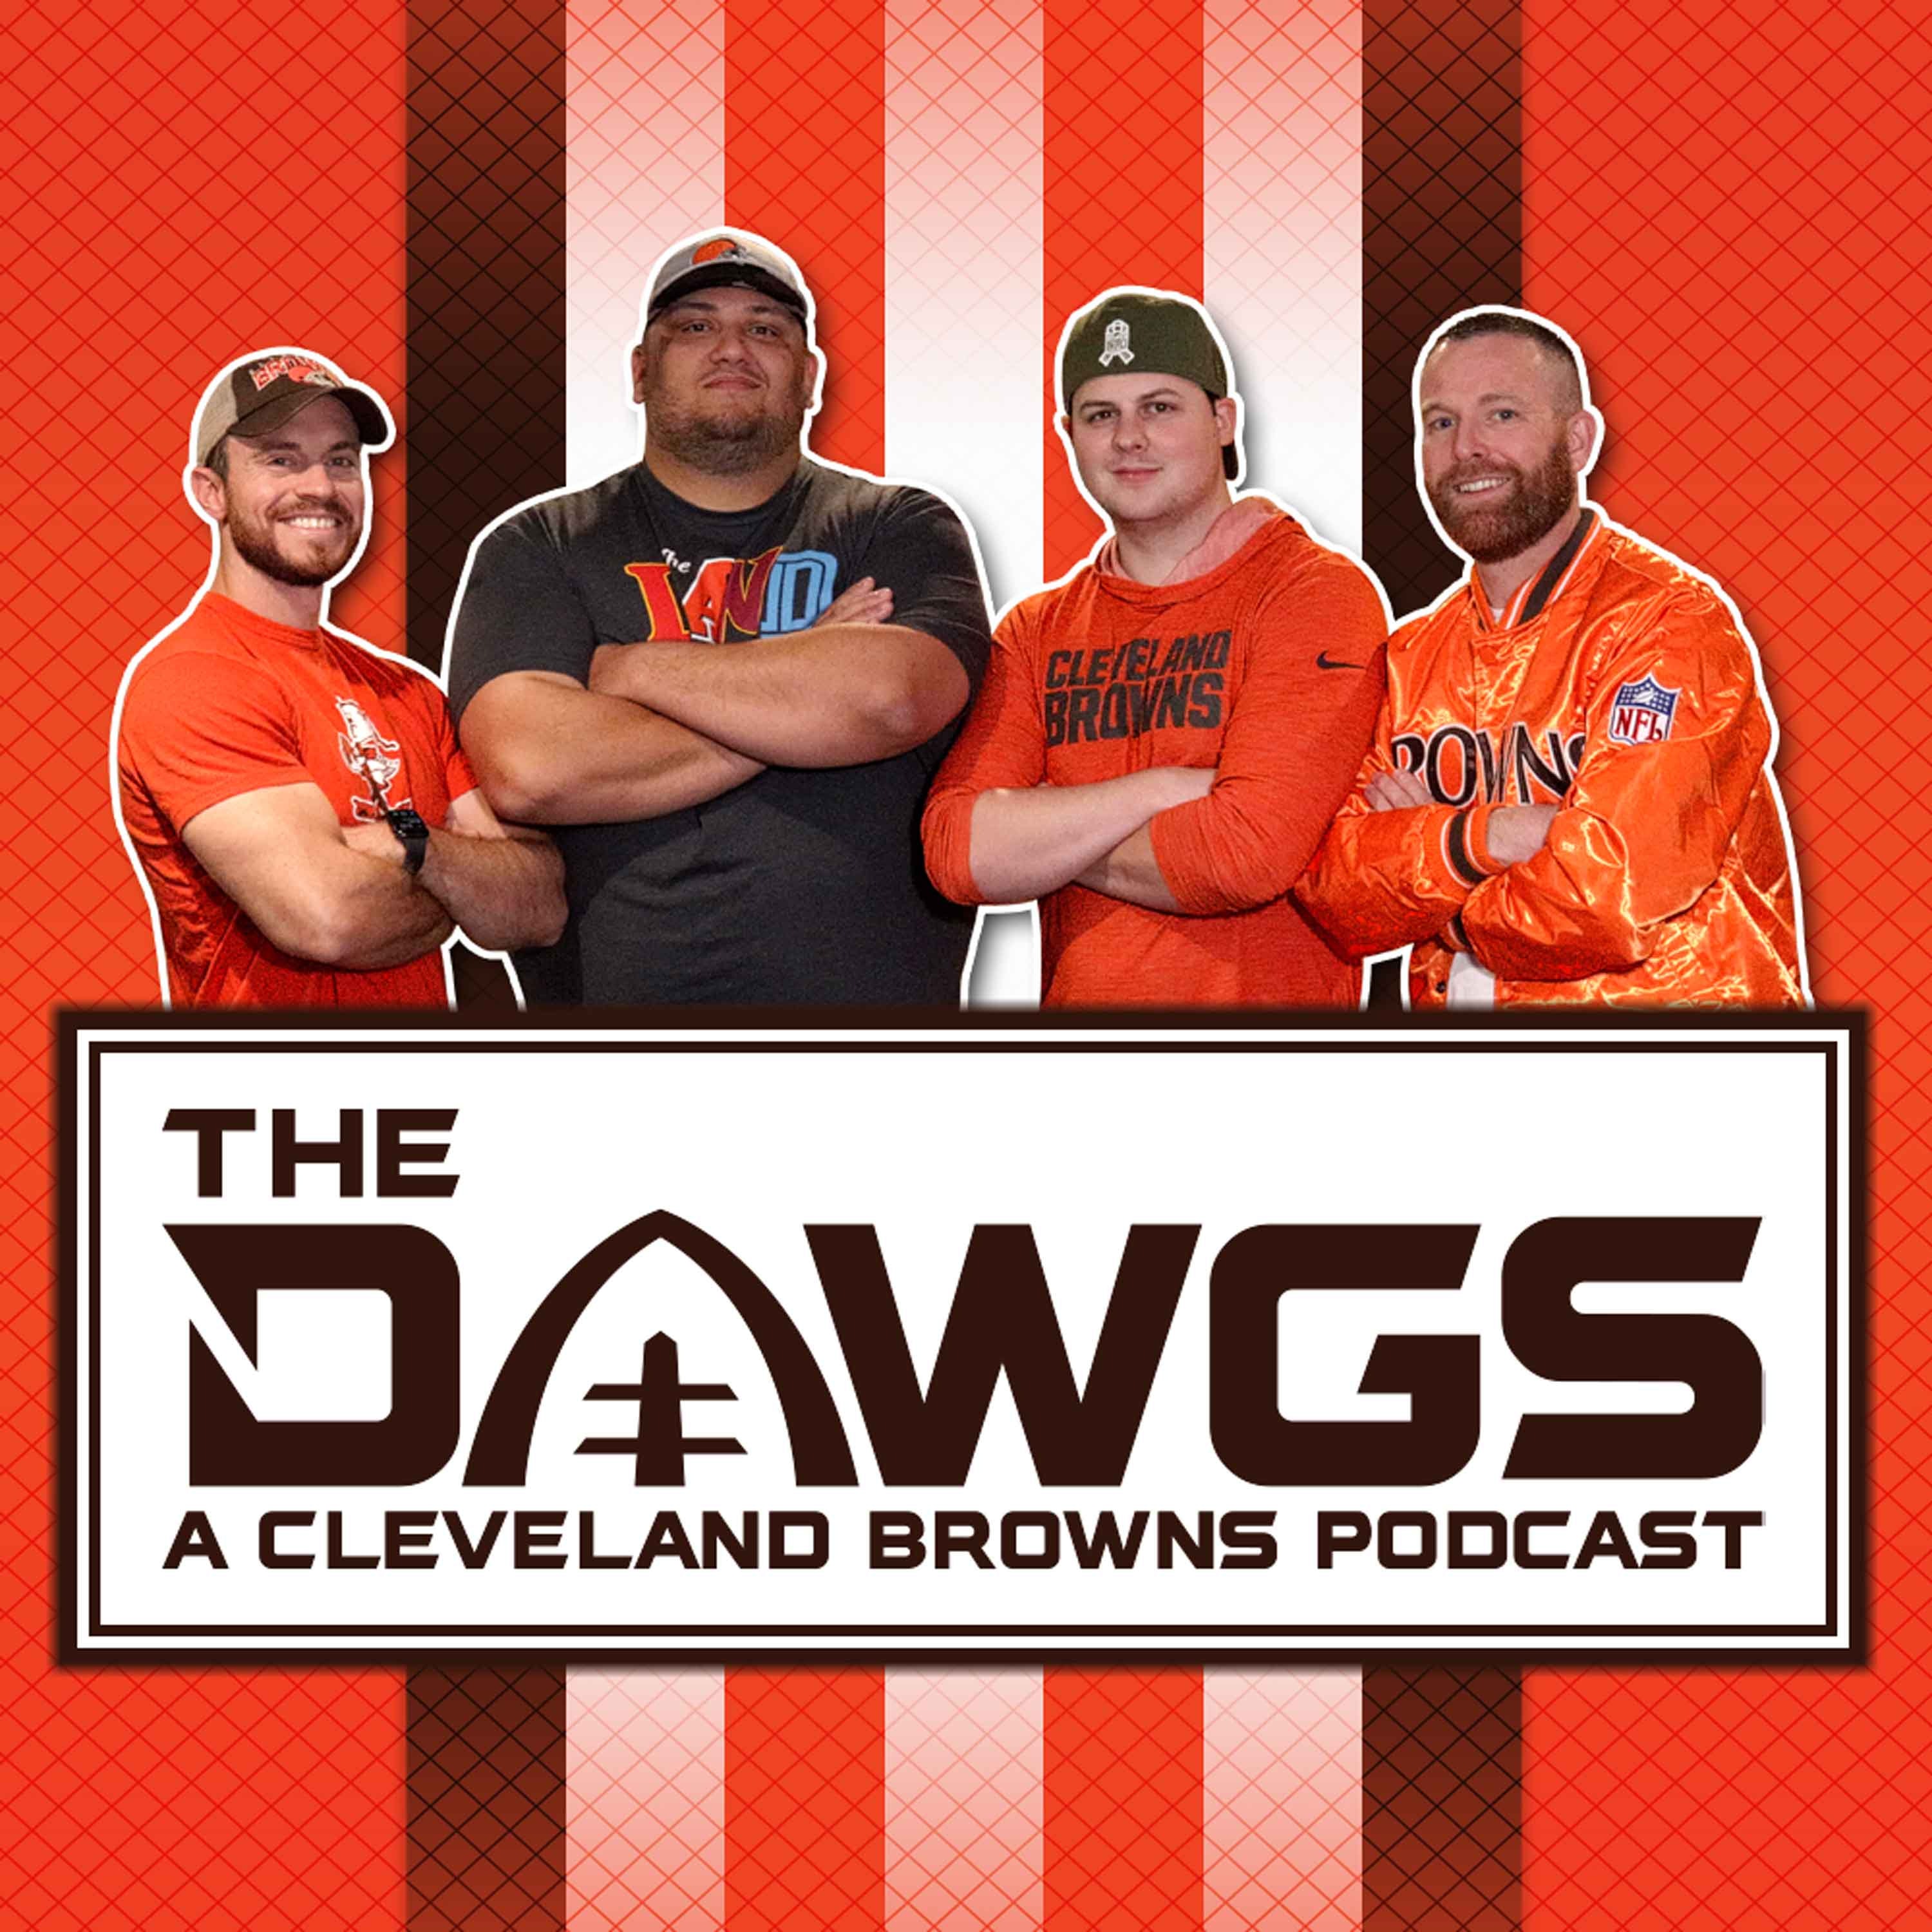 Week 18 Recap - Browns Get Manhandled by Steelers in Season Finale  | The Dawgs - A Cleveland Browns Podcast - January 10, 2023